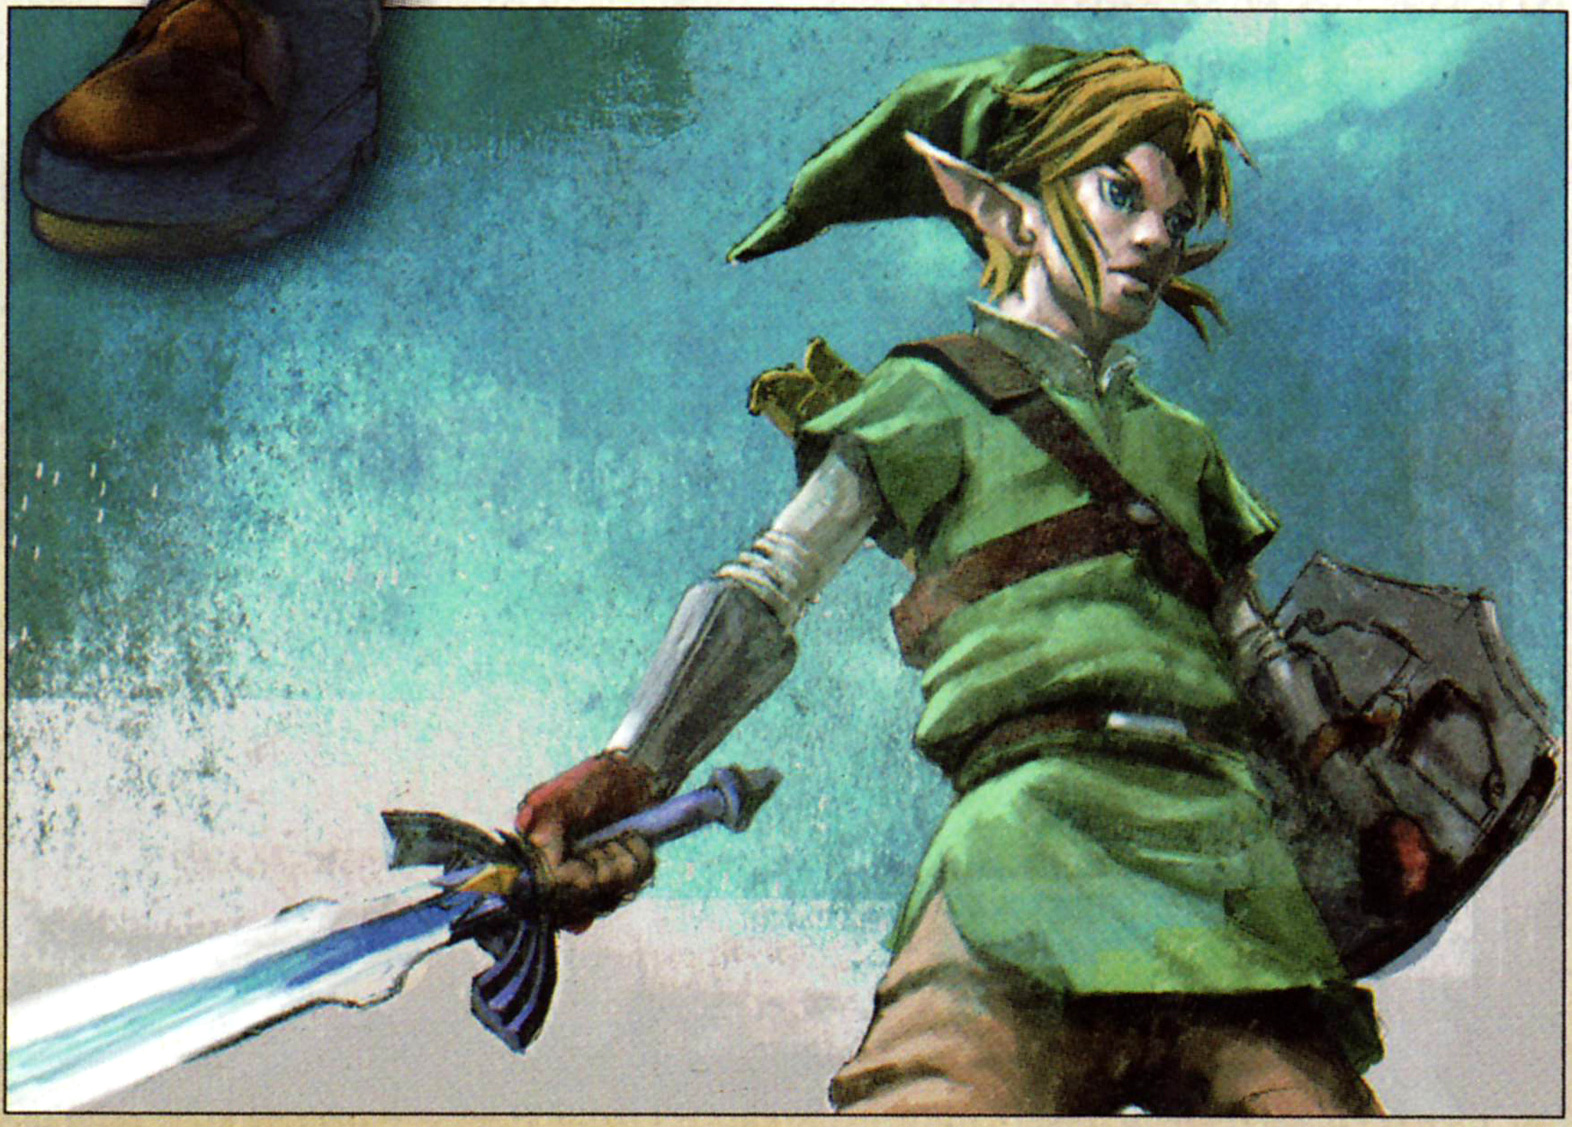 SS Link